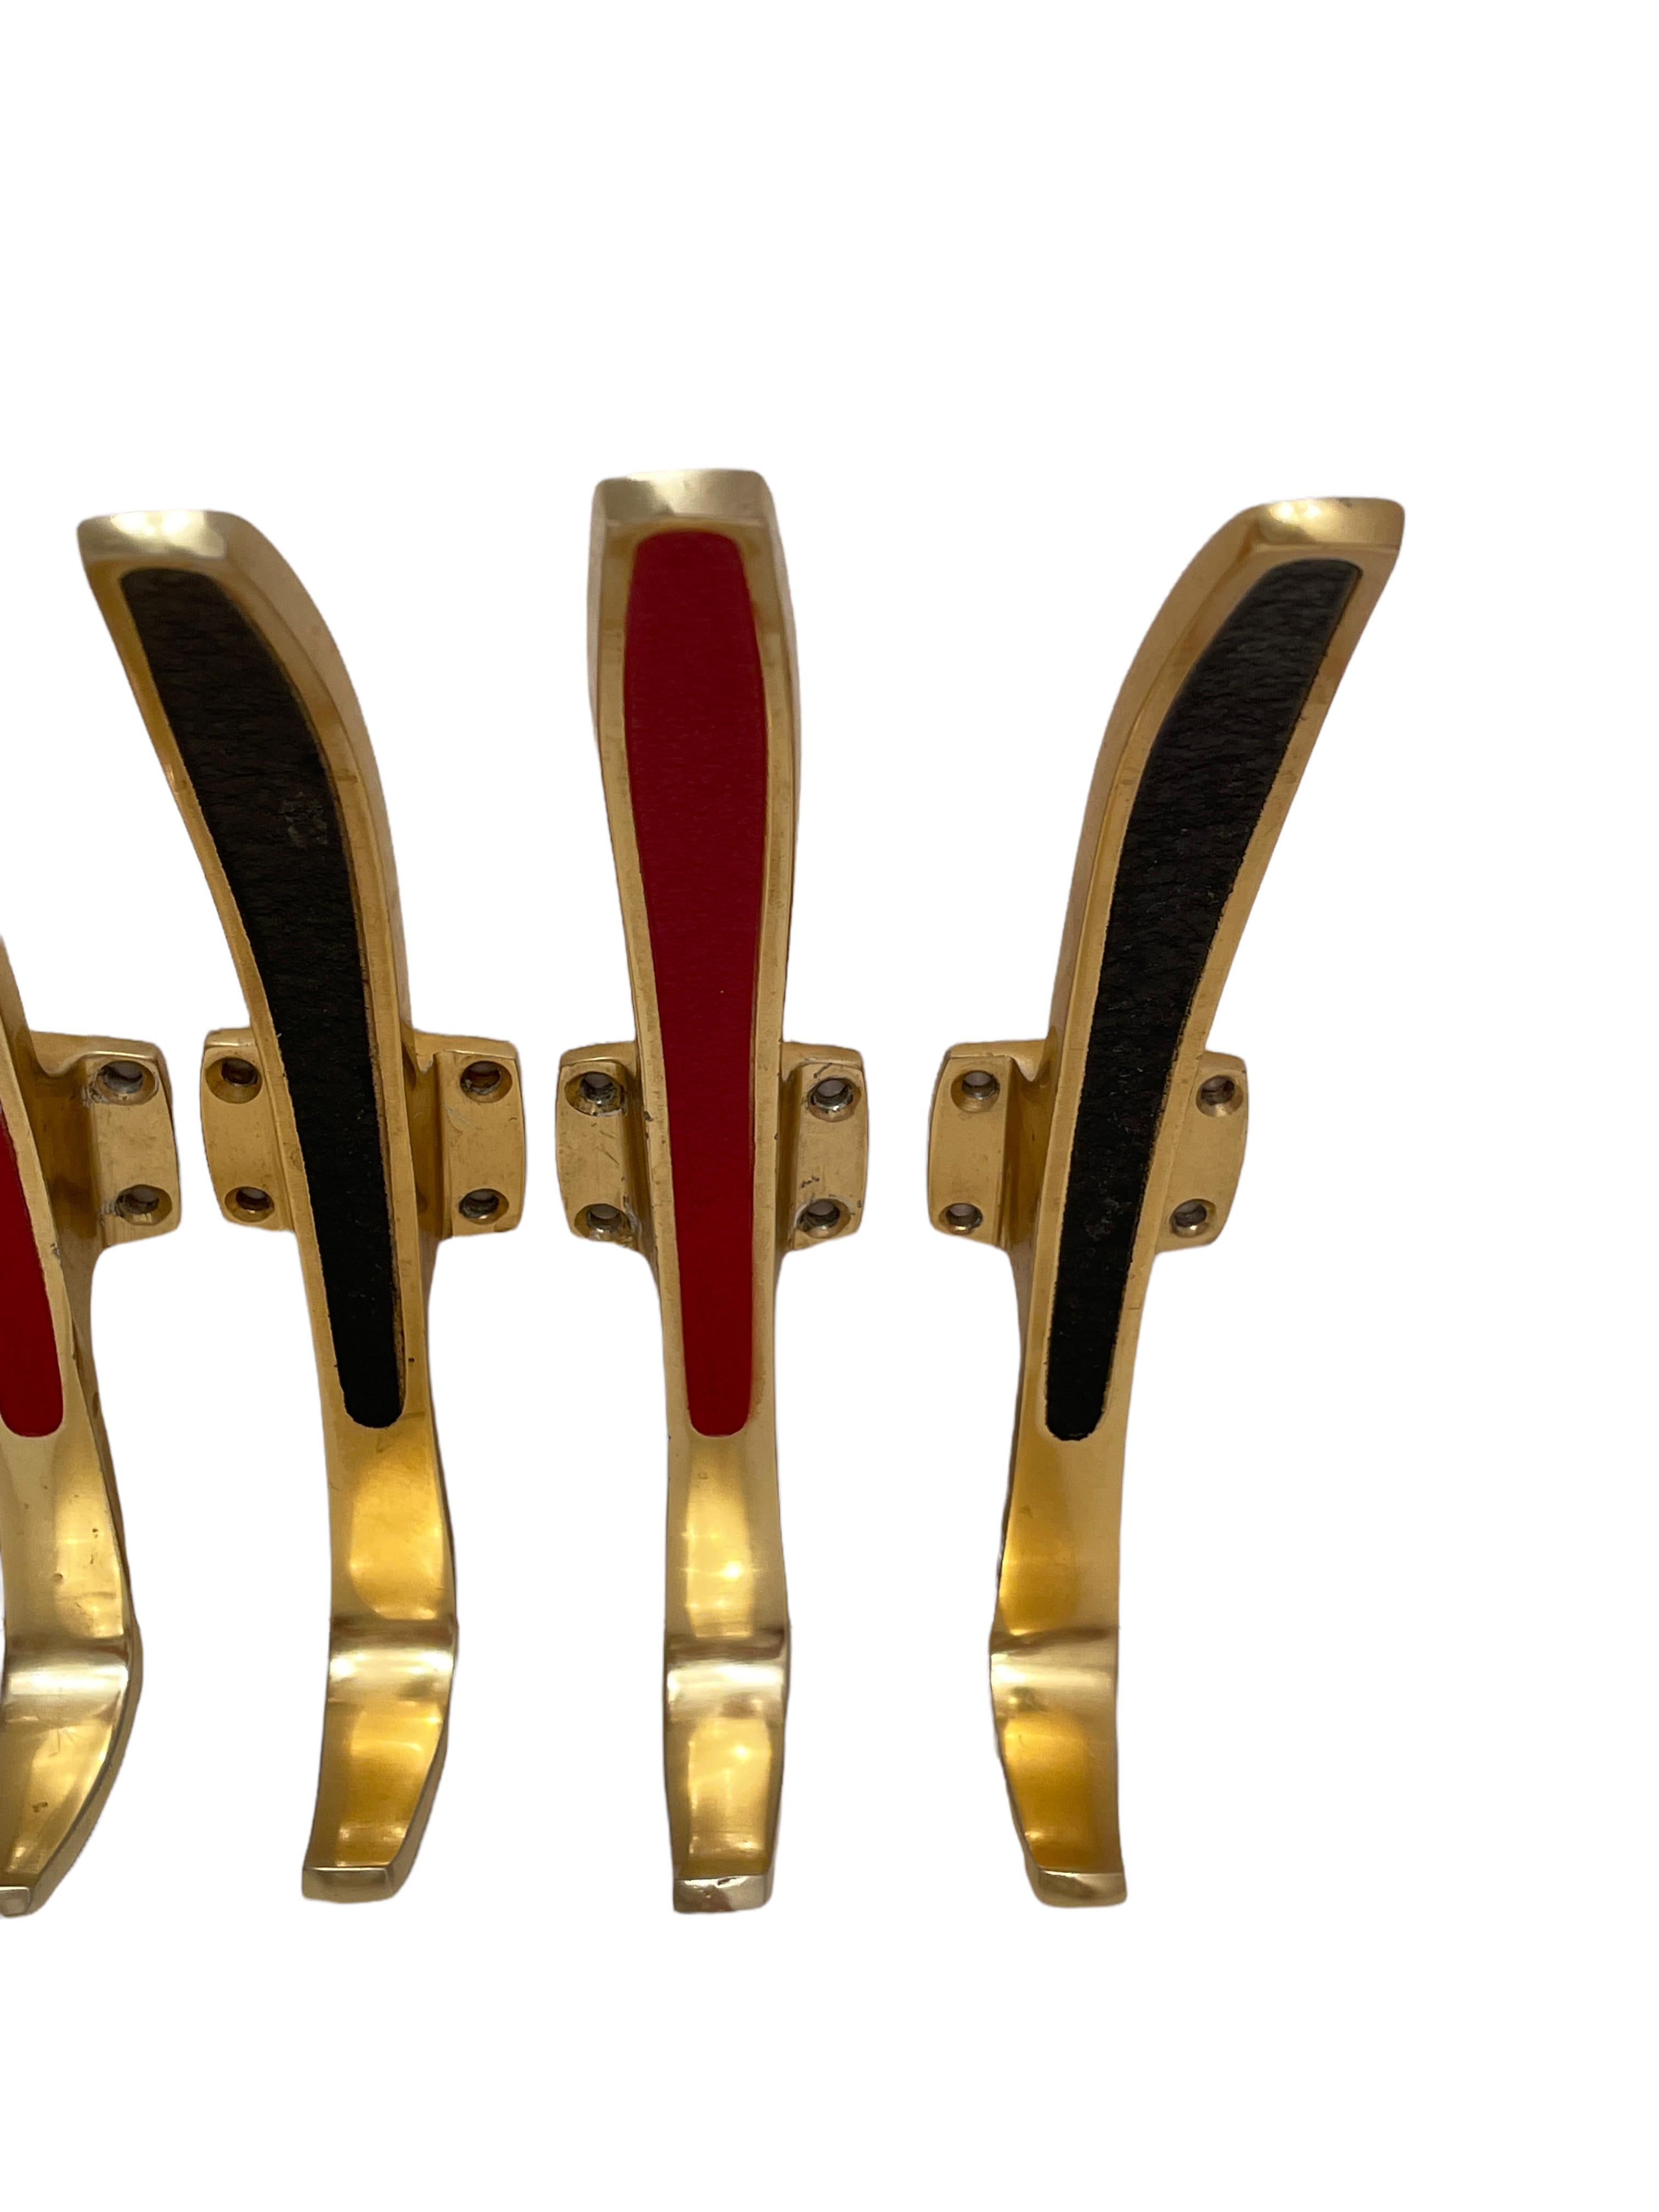 Set of Five Coat Wall Hooks, Black and Red, Mid-Century Modern, 1950s For Sale 2